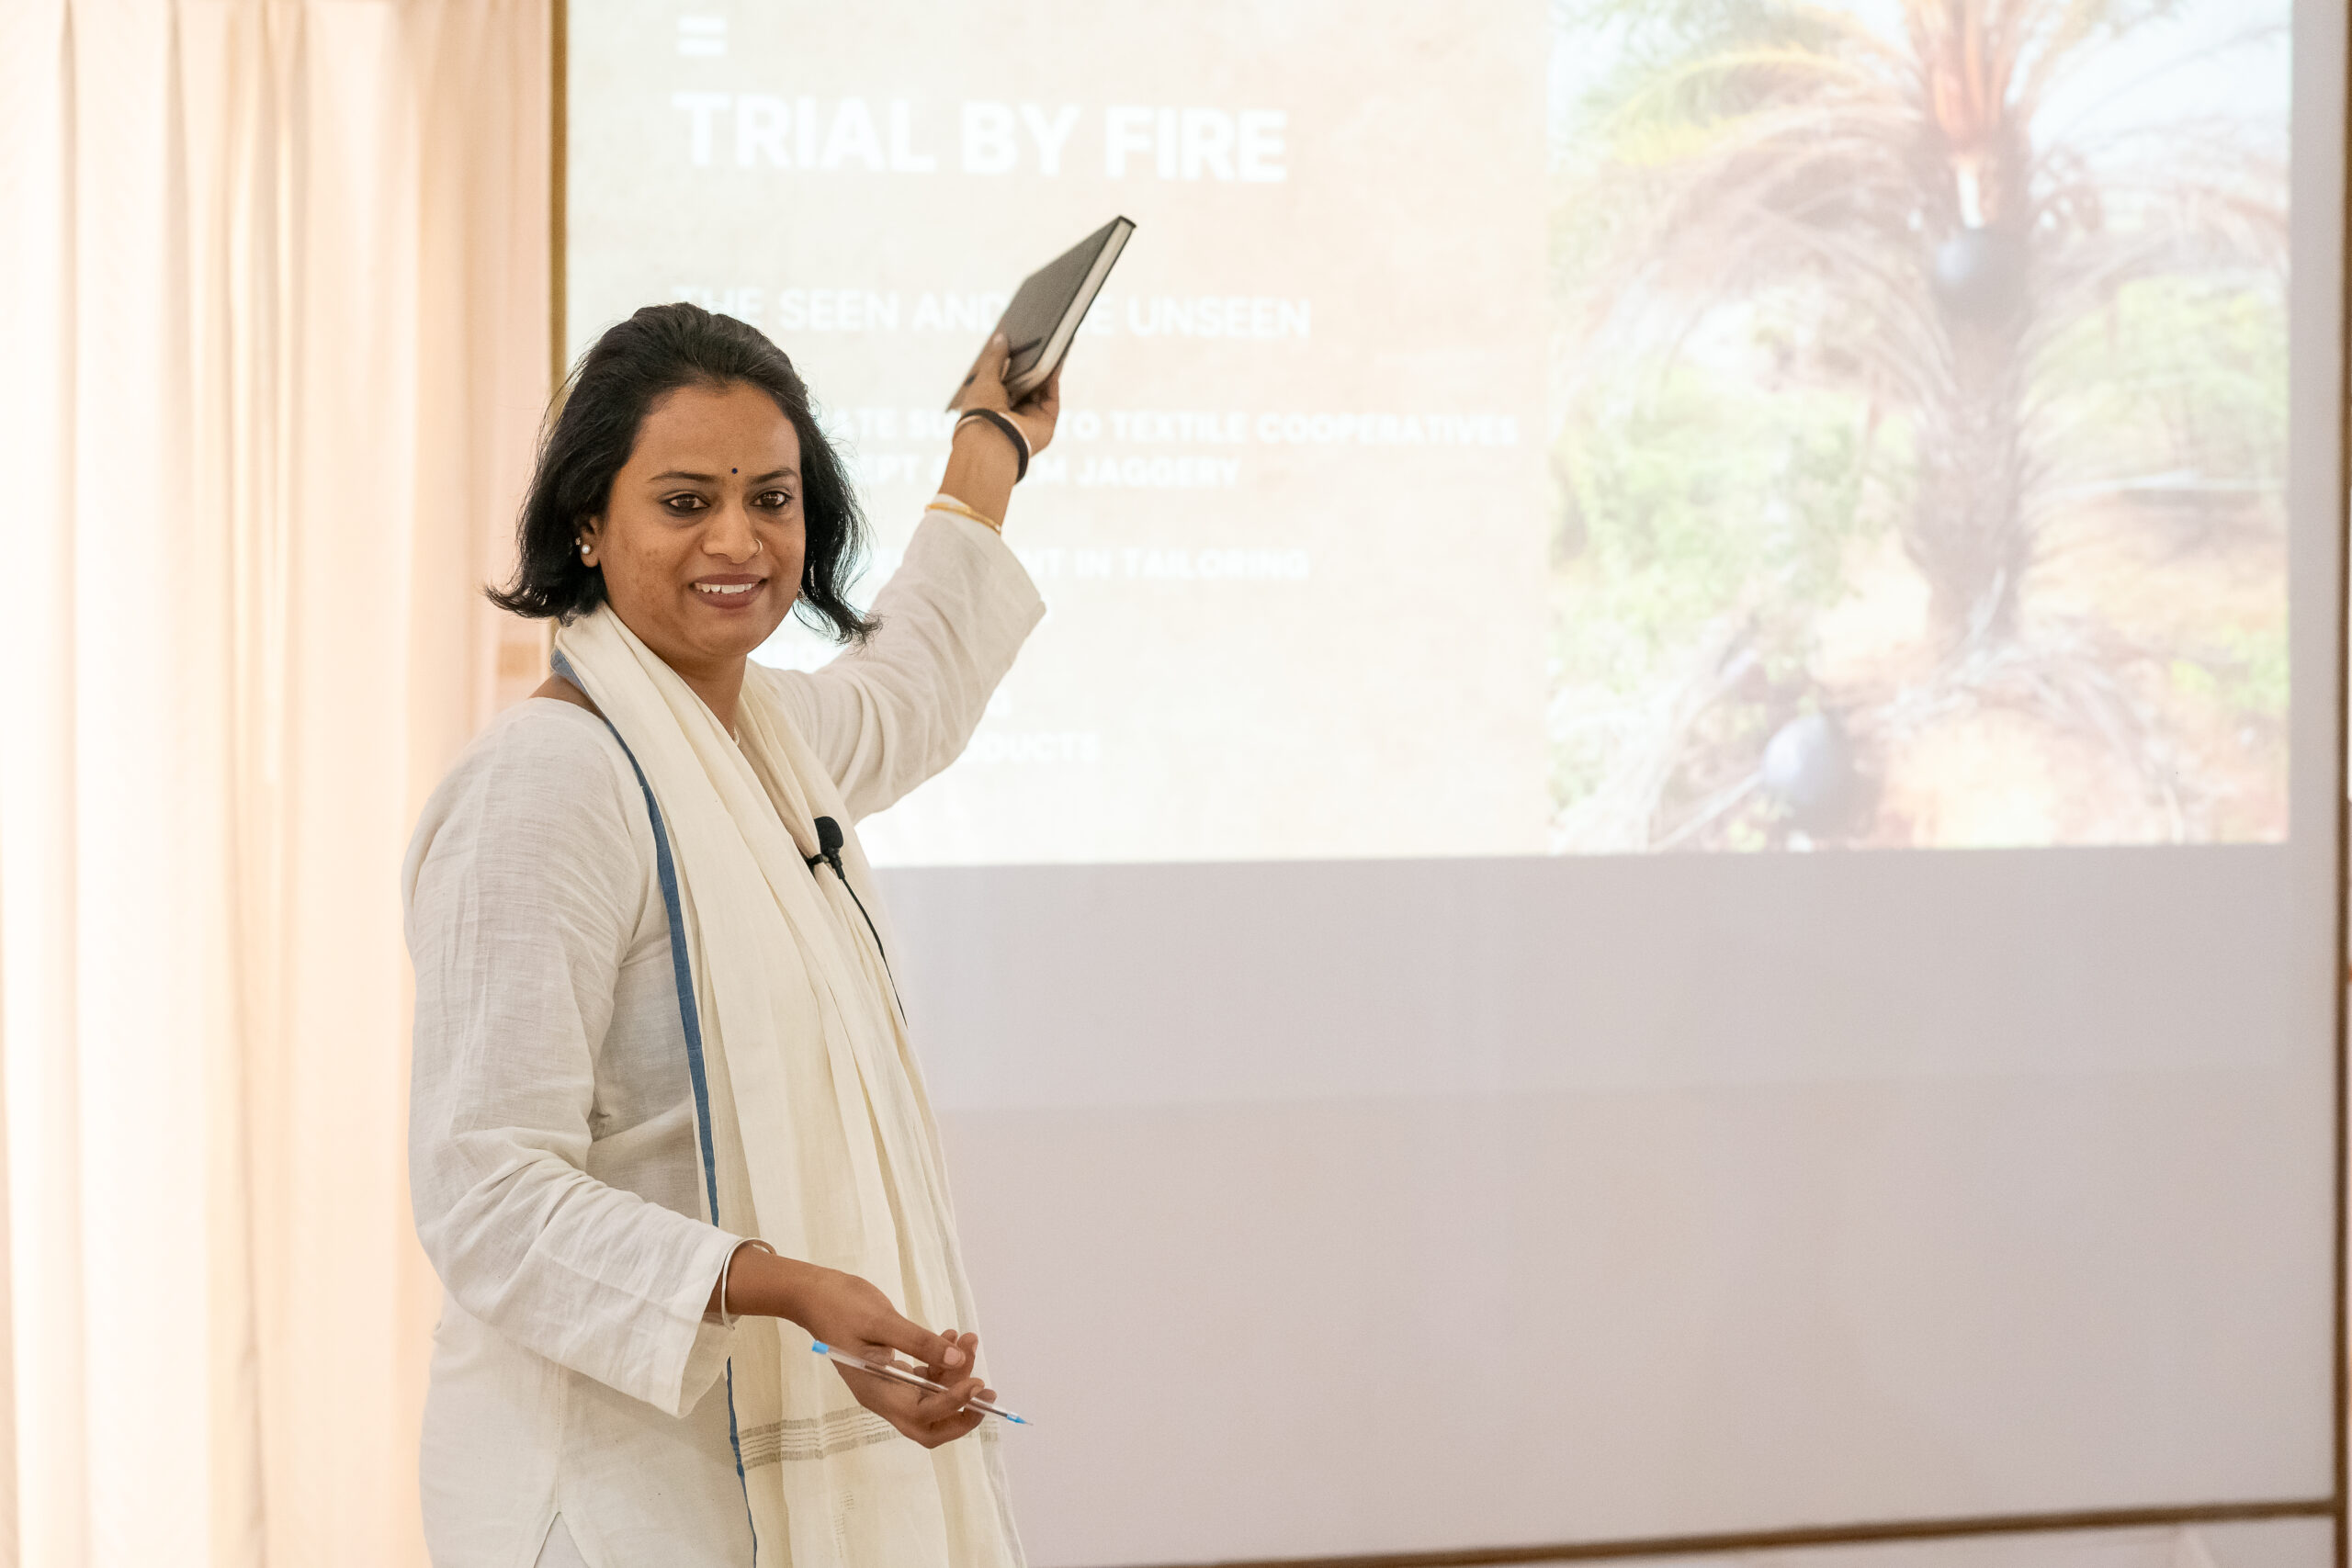 Manisha Kairaly of Arugu speaks at the GRE Launch in Bangalore on January 23